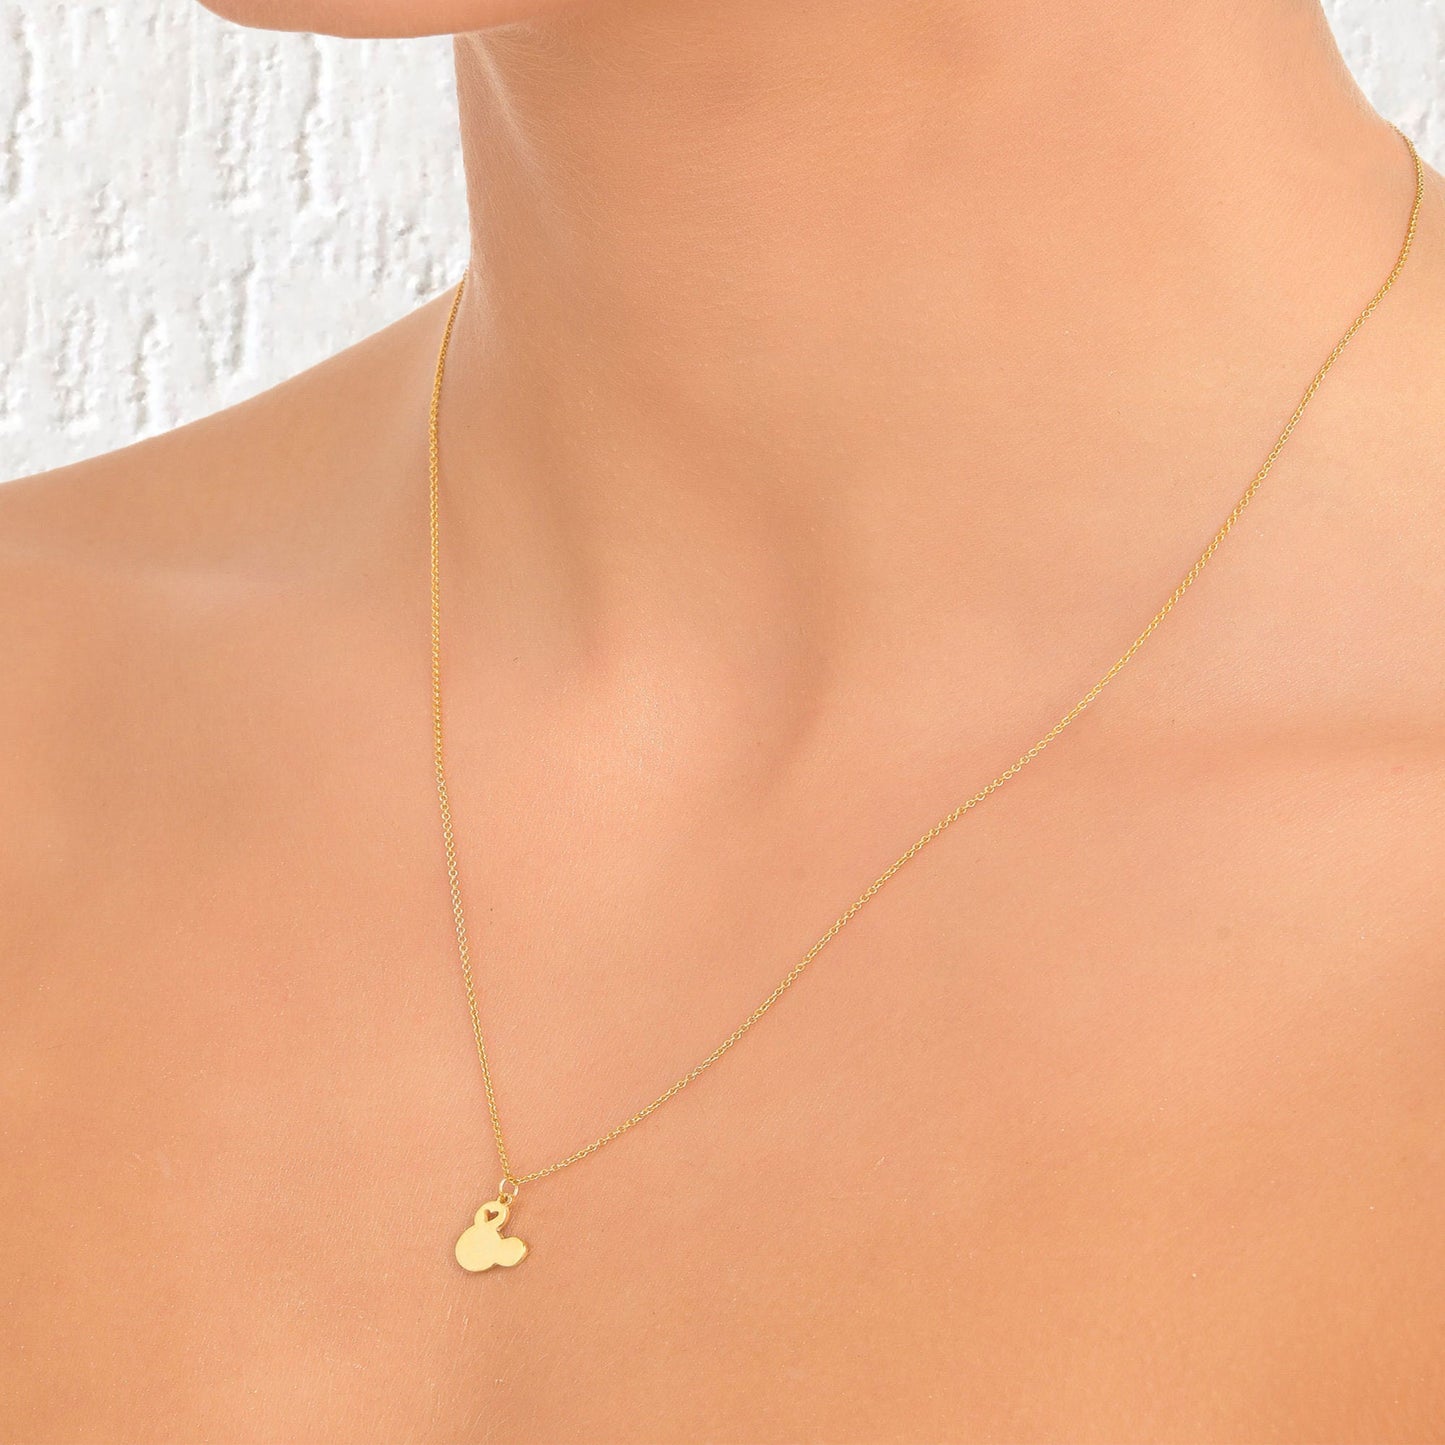 Solid Gold mickey mouse Necklace, 14K yellow gold, solid gold thin chain, mouse necklace, Simple Everyday Necklace , unique gift for her